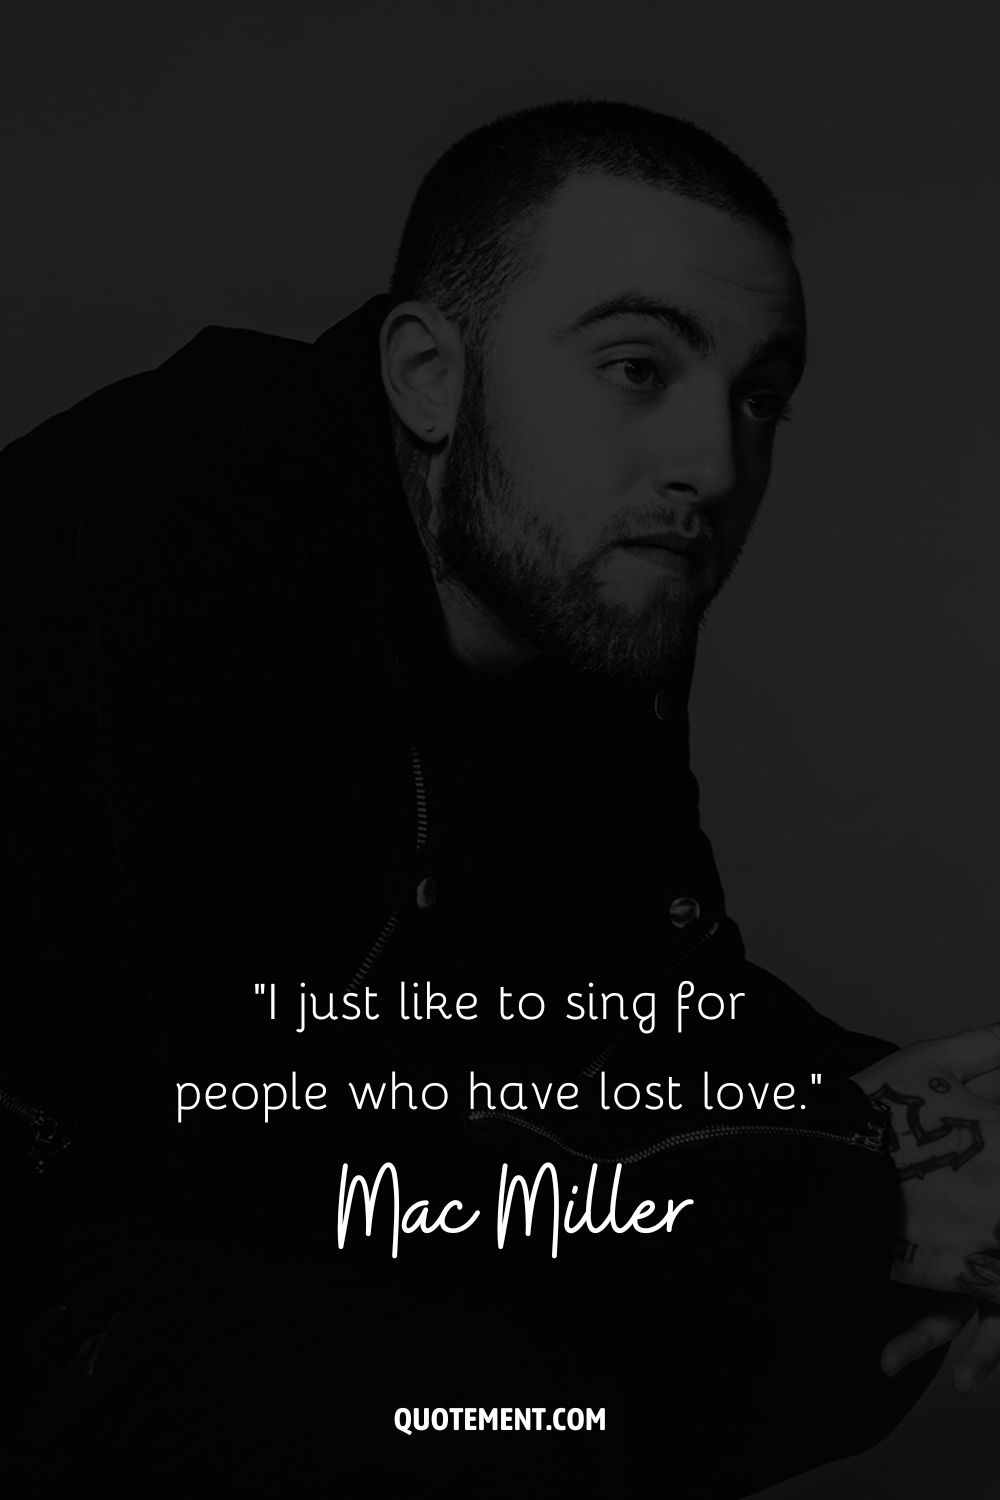 “I just like to sing for people who have lost love.” – Mac Miller